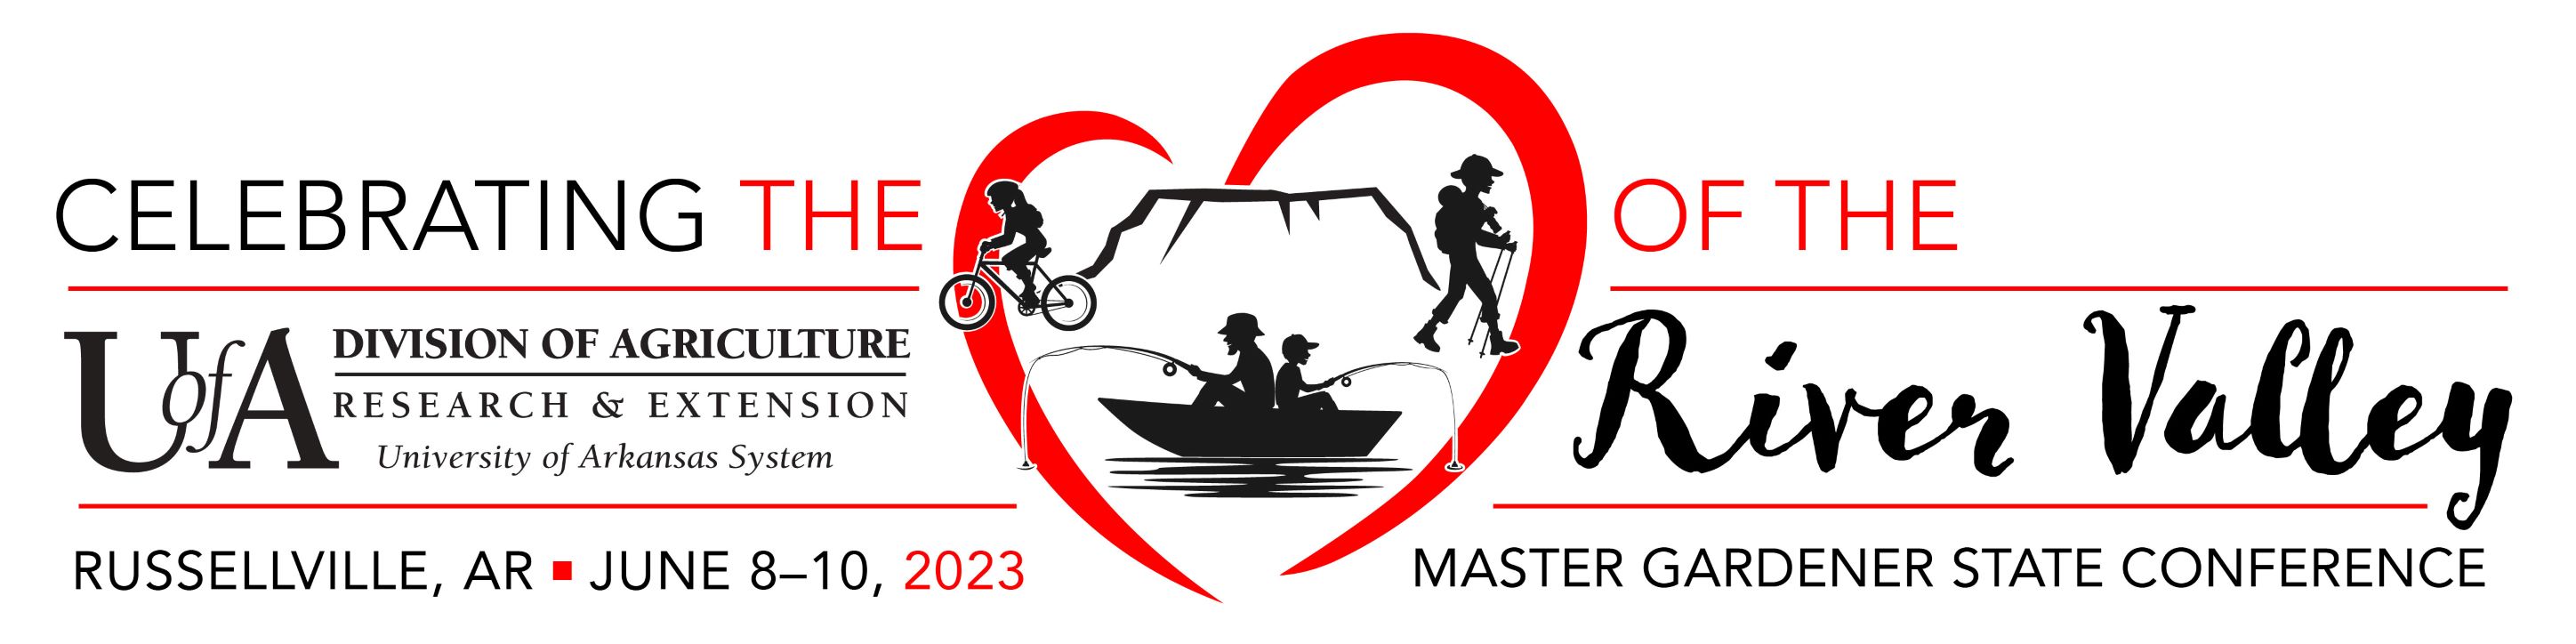 2023 Master Gardener Conference artwork.  Artwork shows silouette of someone hiking, fishing and cycling.  Text reads celebrating the heart of the River Valley.  Master Gardener State Conference held in Russellville, AR, June 8 - 10, 2023. 